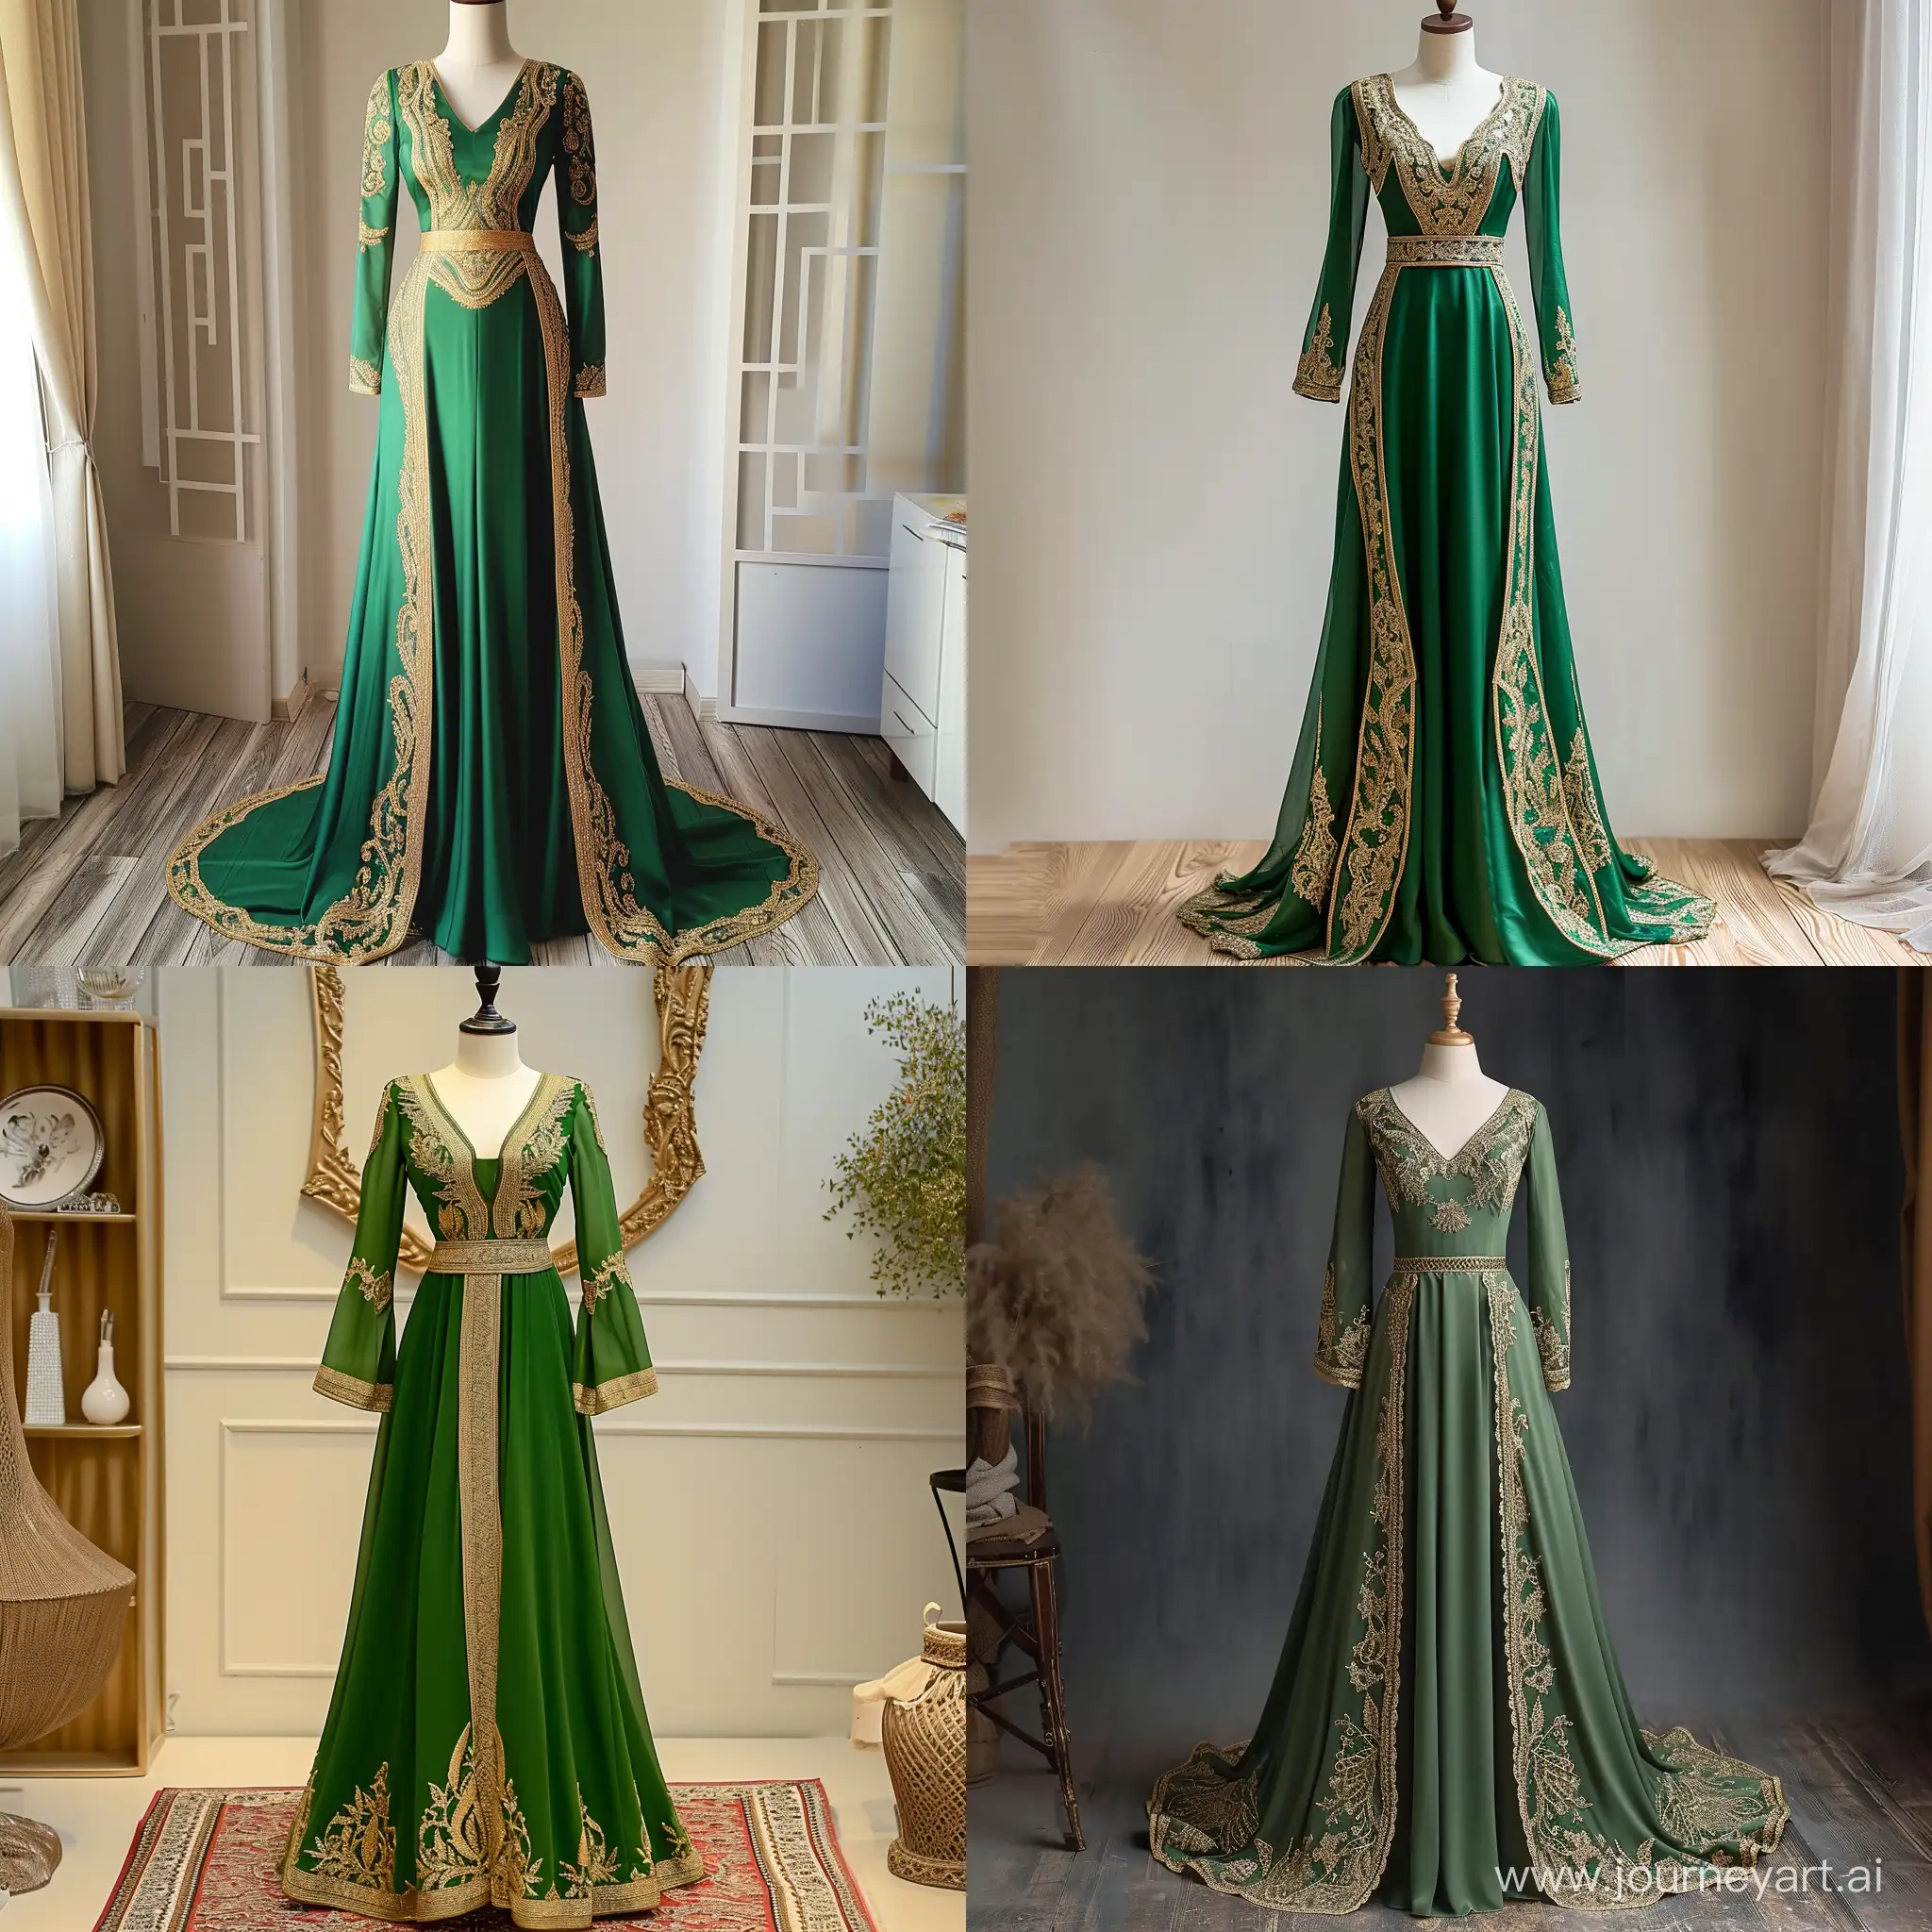 Elegant-Green-Dress-with-Intricate-Golden-Embroidery-on-Mannequin